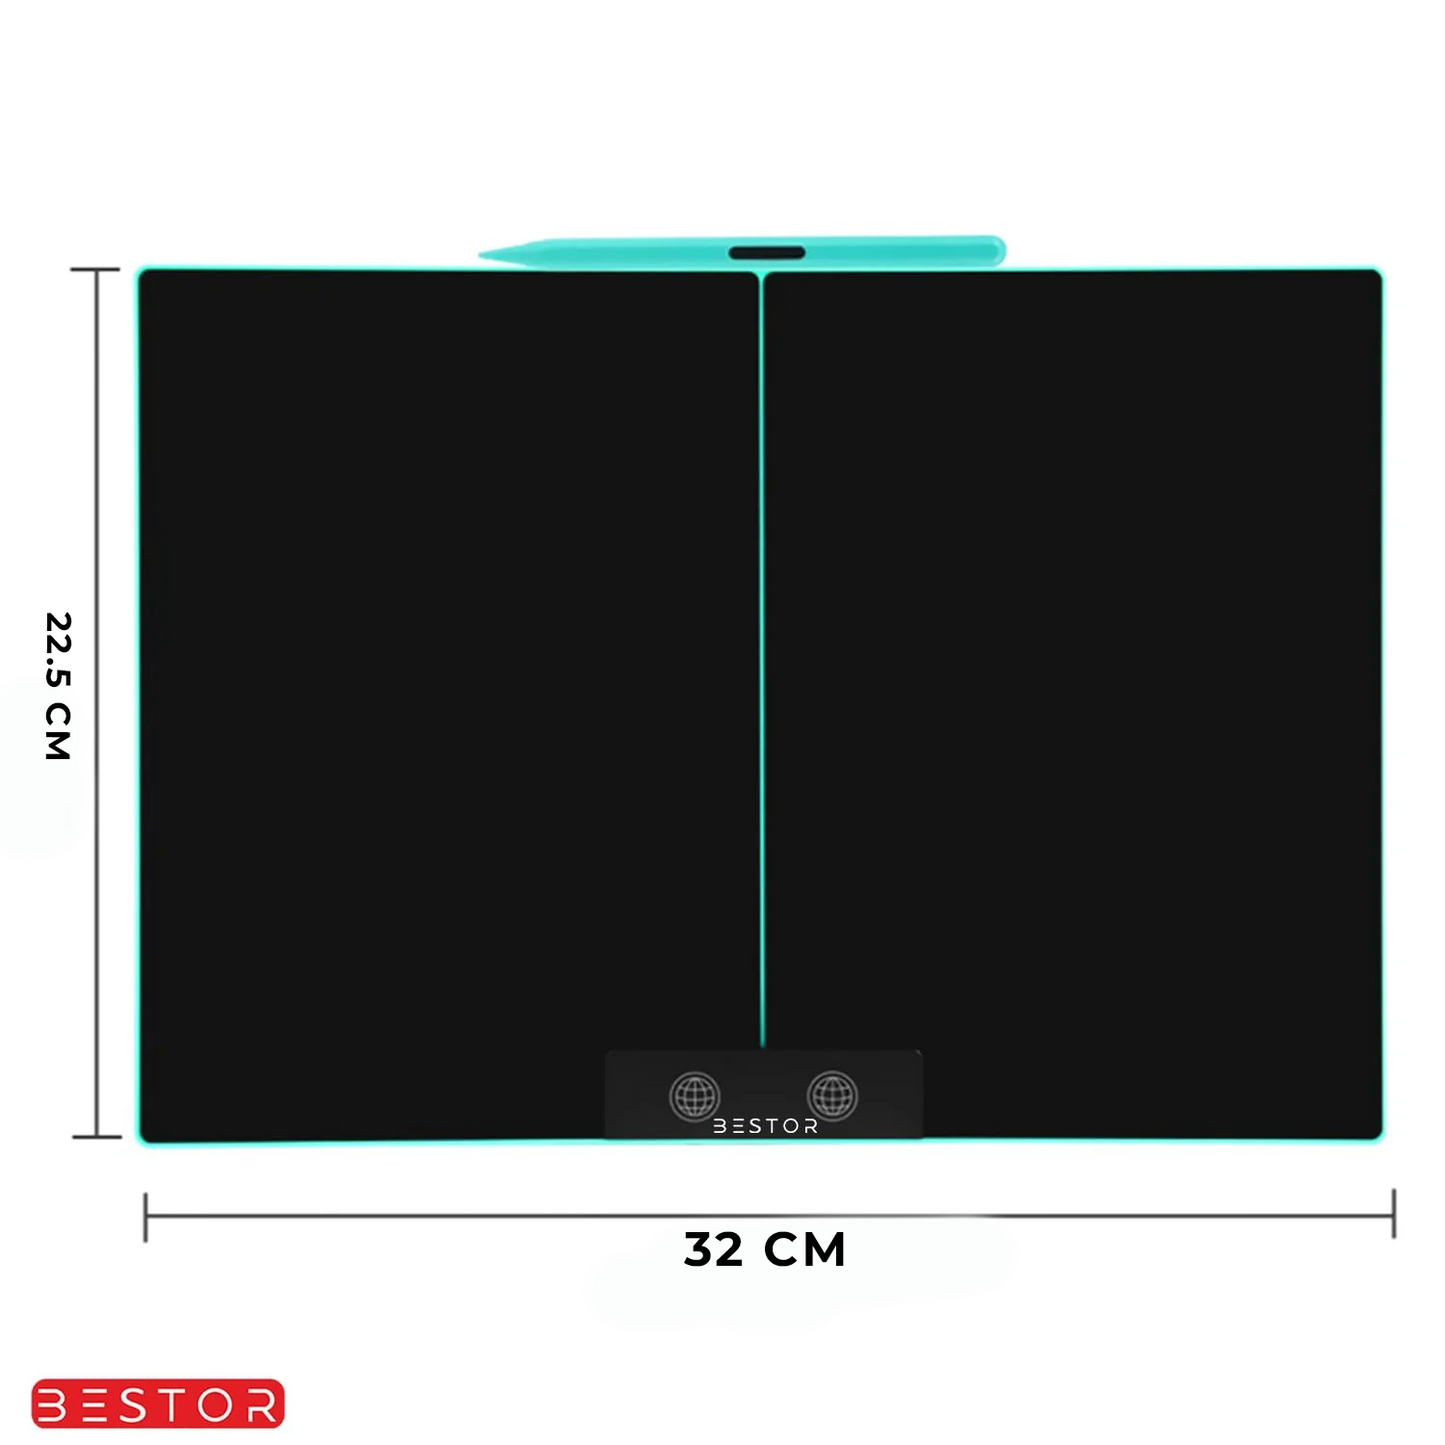 15 Inch LCD Writing Tablet